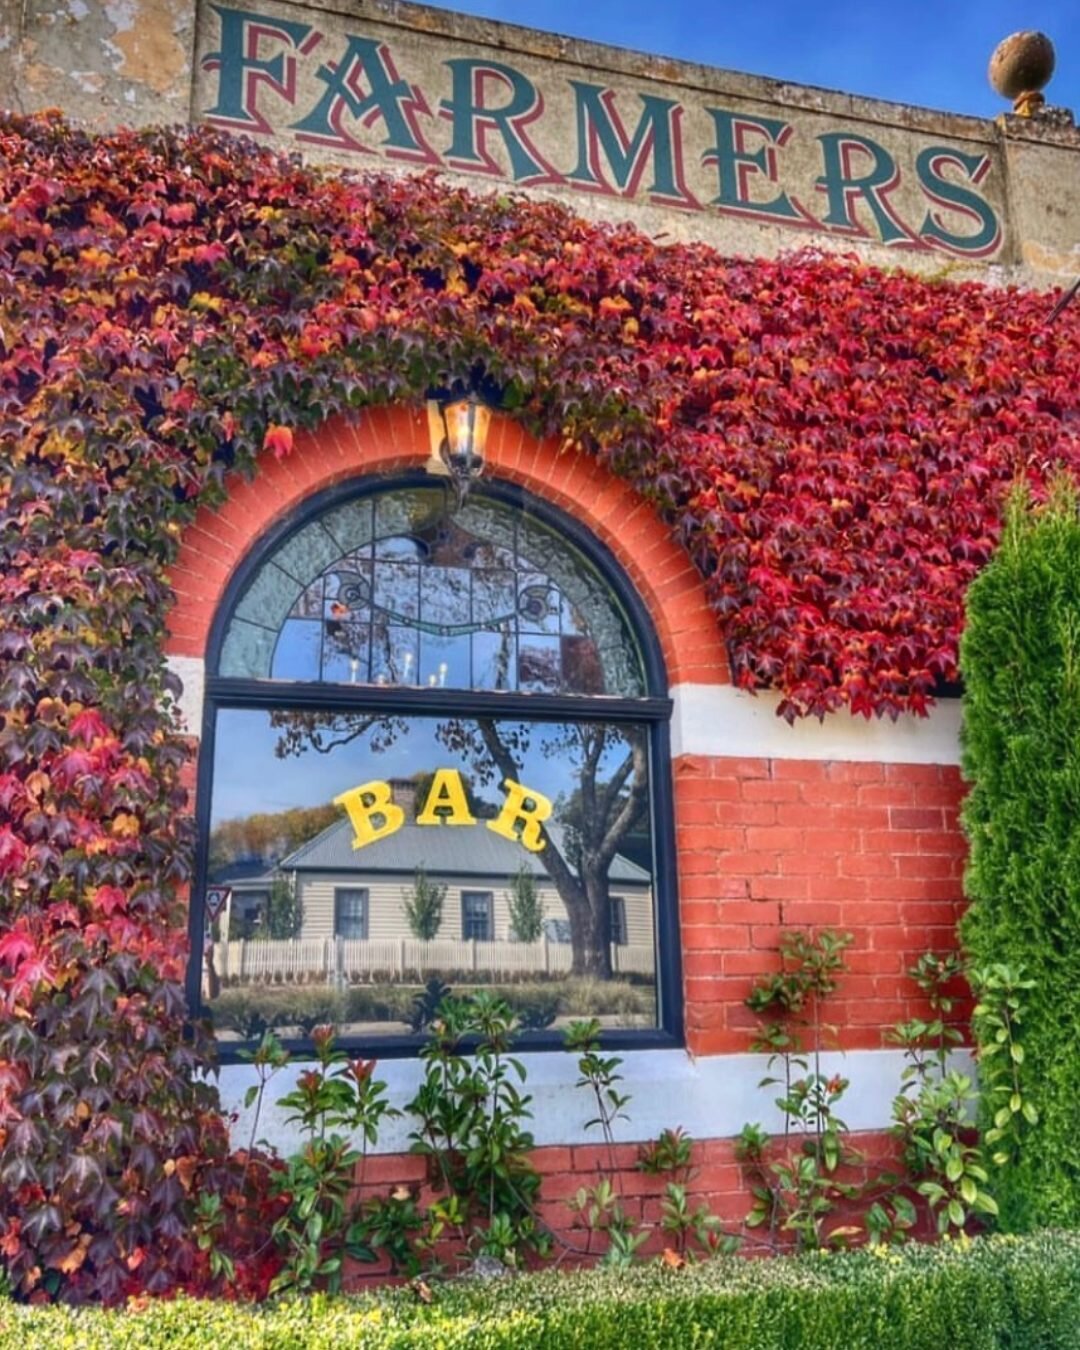 Farmers Arms Hotel in all its Autumn beauty&hellip;just stunning! 😍🍁🍂
Captured by our beautiful customers @deb_o83 &amp; @beckwalkerr 🥰

.
.
.
.
.
.
#beergarden #daylesford #discoverdaylesford #daylesfordmacedonlife #daylesfordmacedonranges #pub 